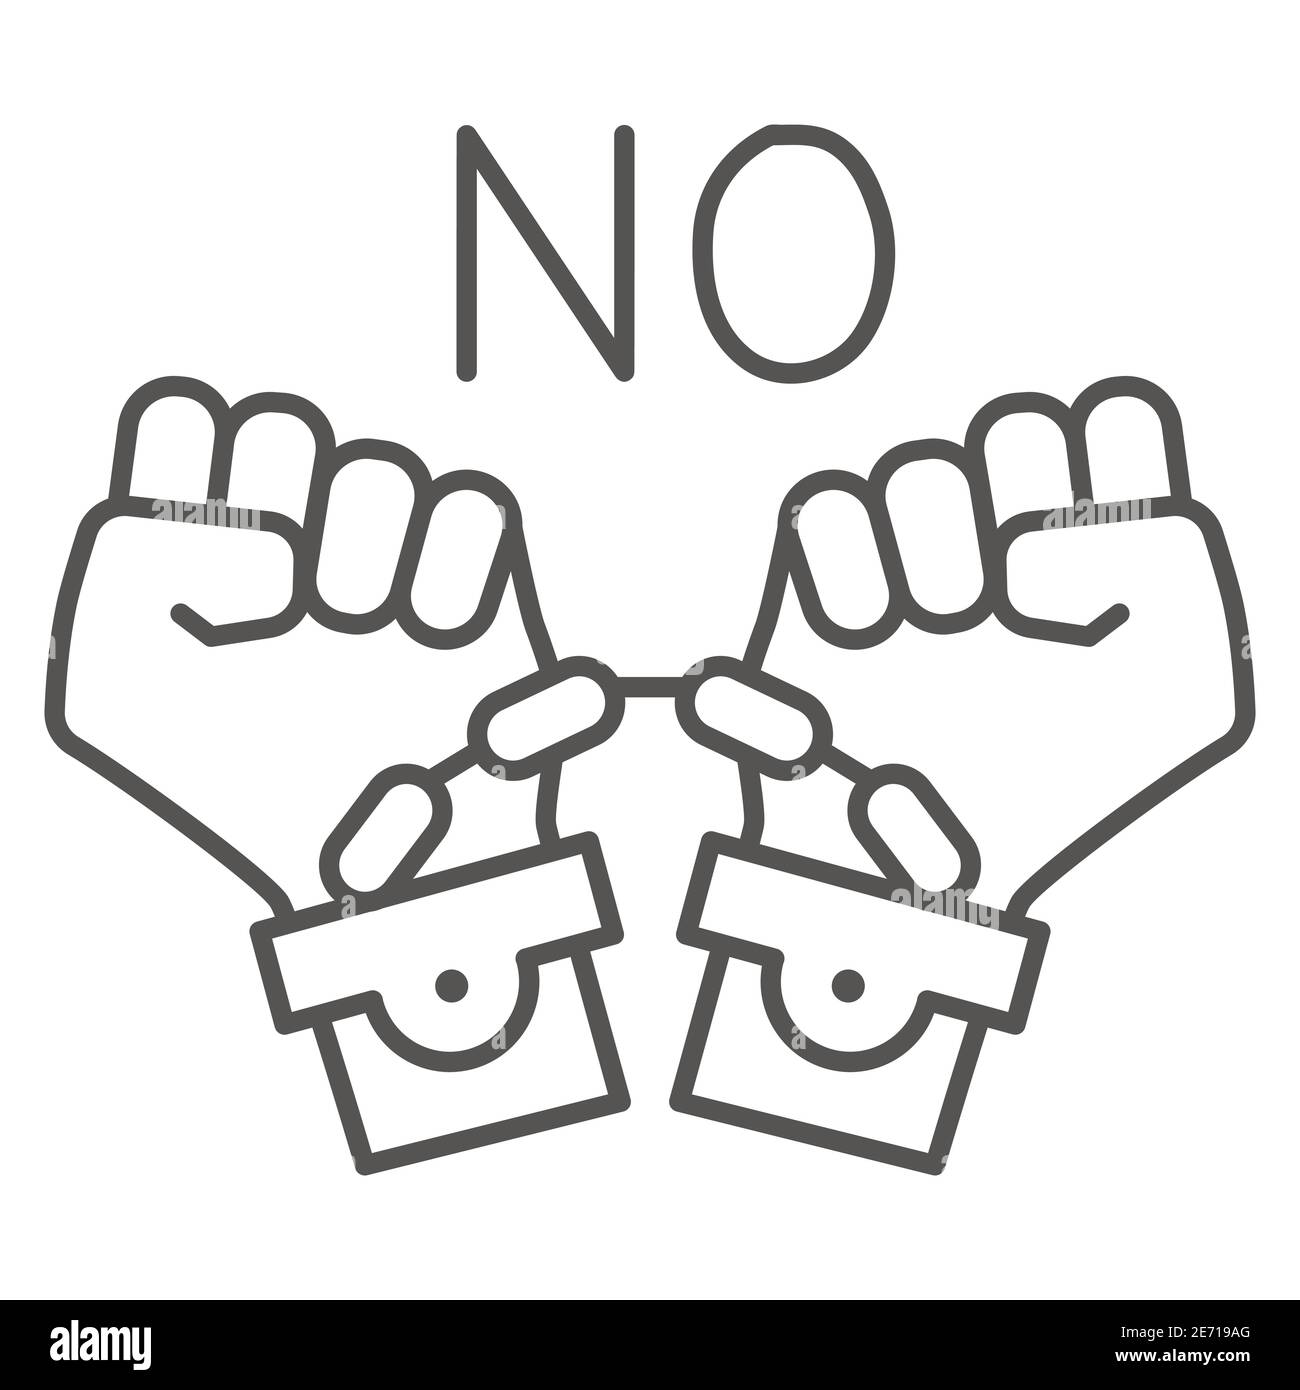 No to shackles symbol thin line icon, Black lives matter concept, No violence against blacks sign on white background, handcuffed hands icon in Stock Vector